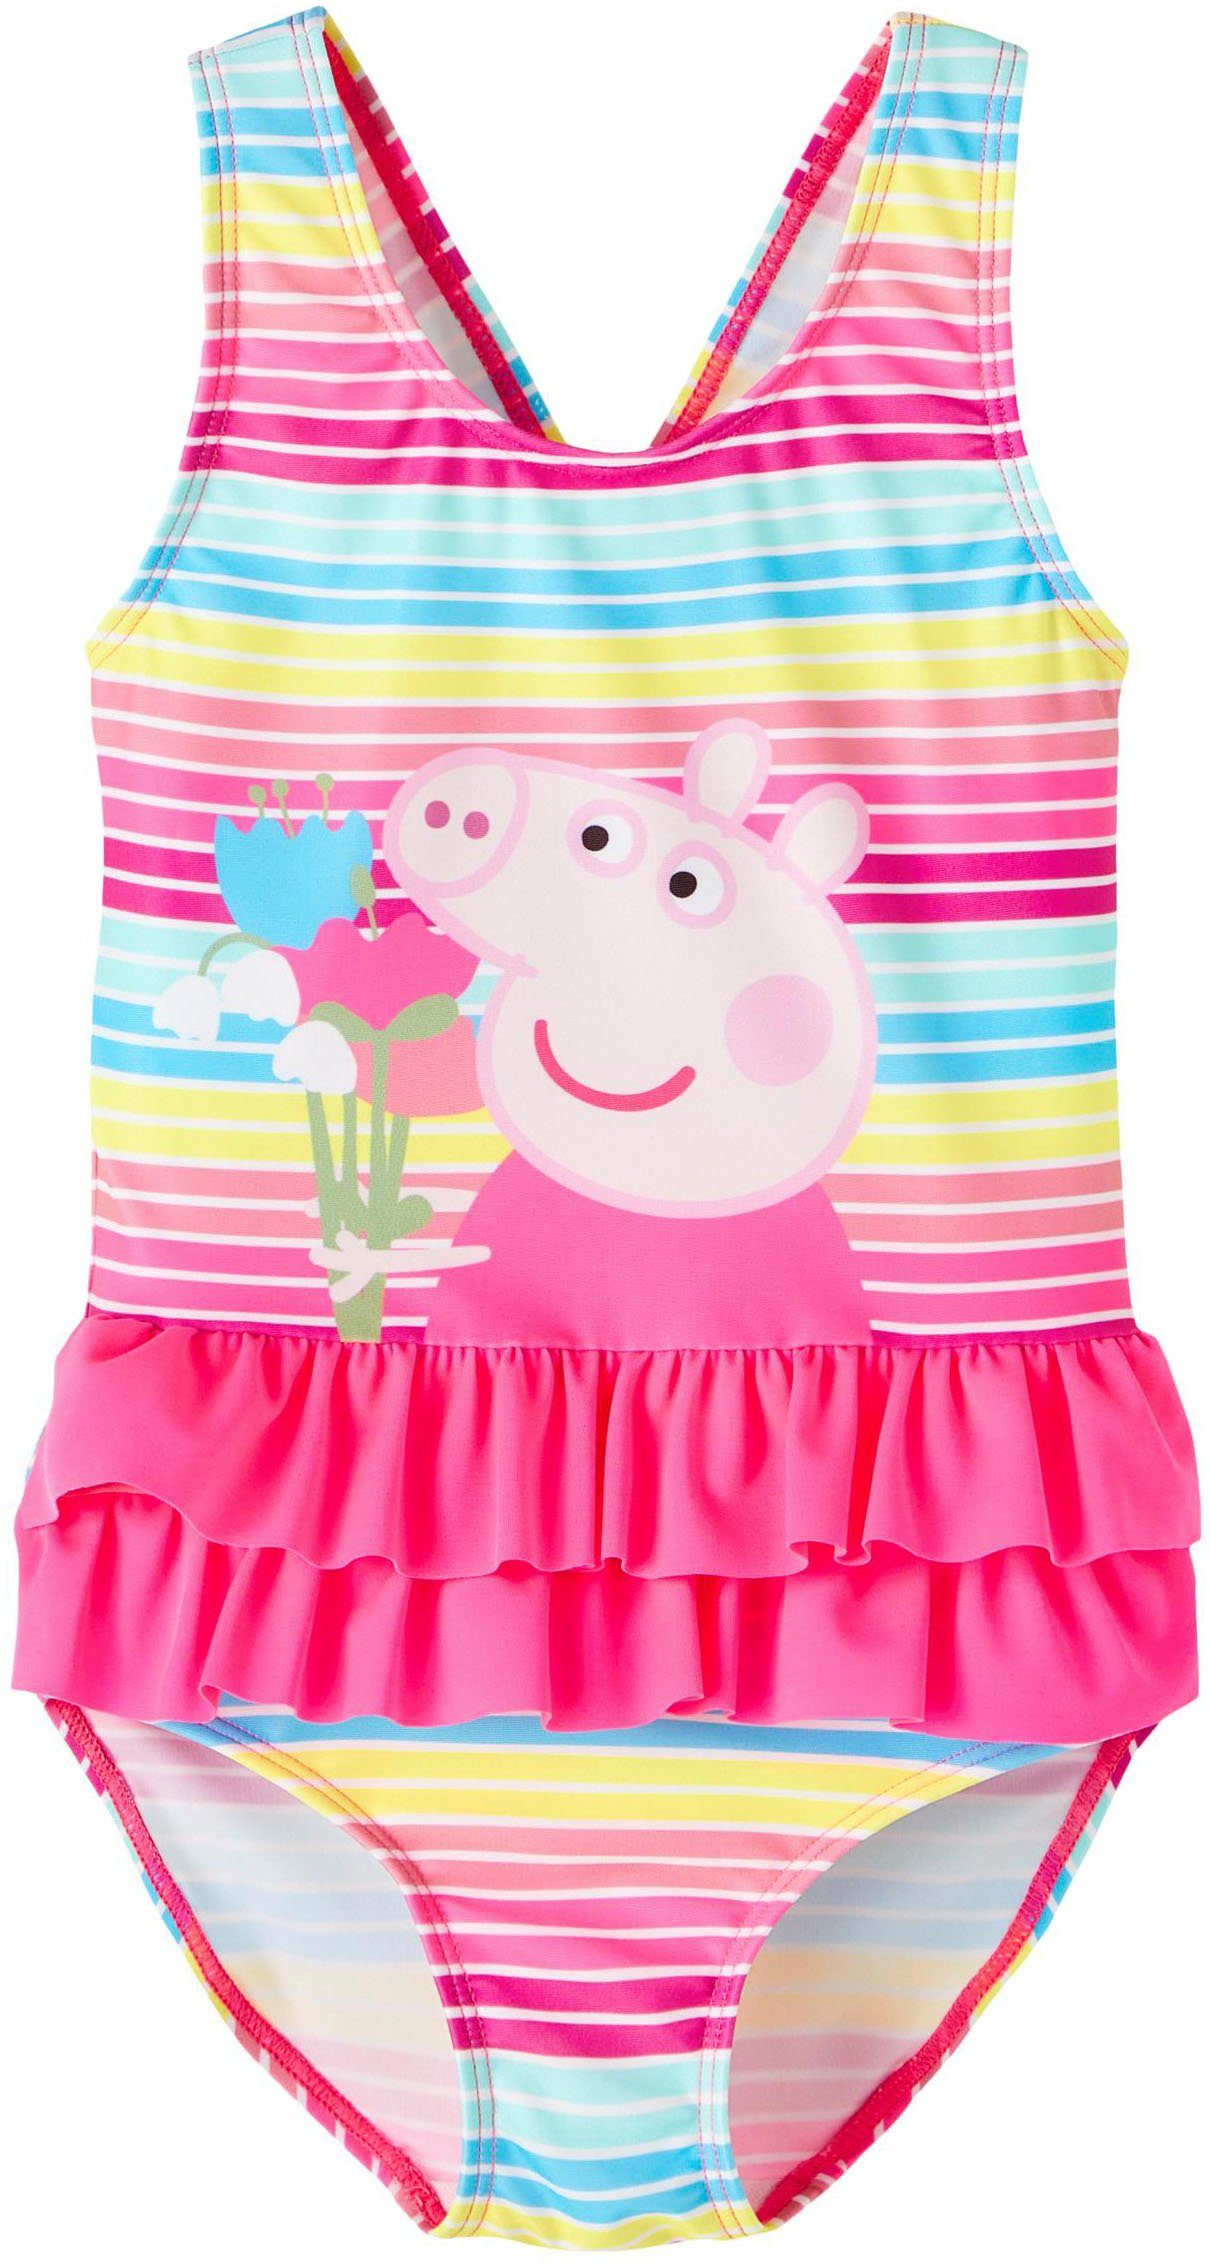 SWIMSUIT It CPLG Badeanzug PEPPAPIG Name NMFMULLE